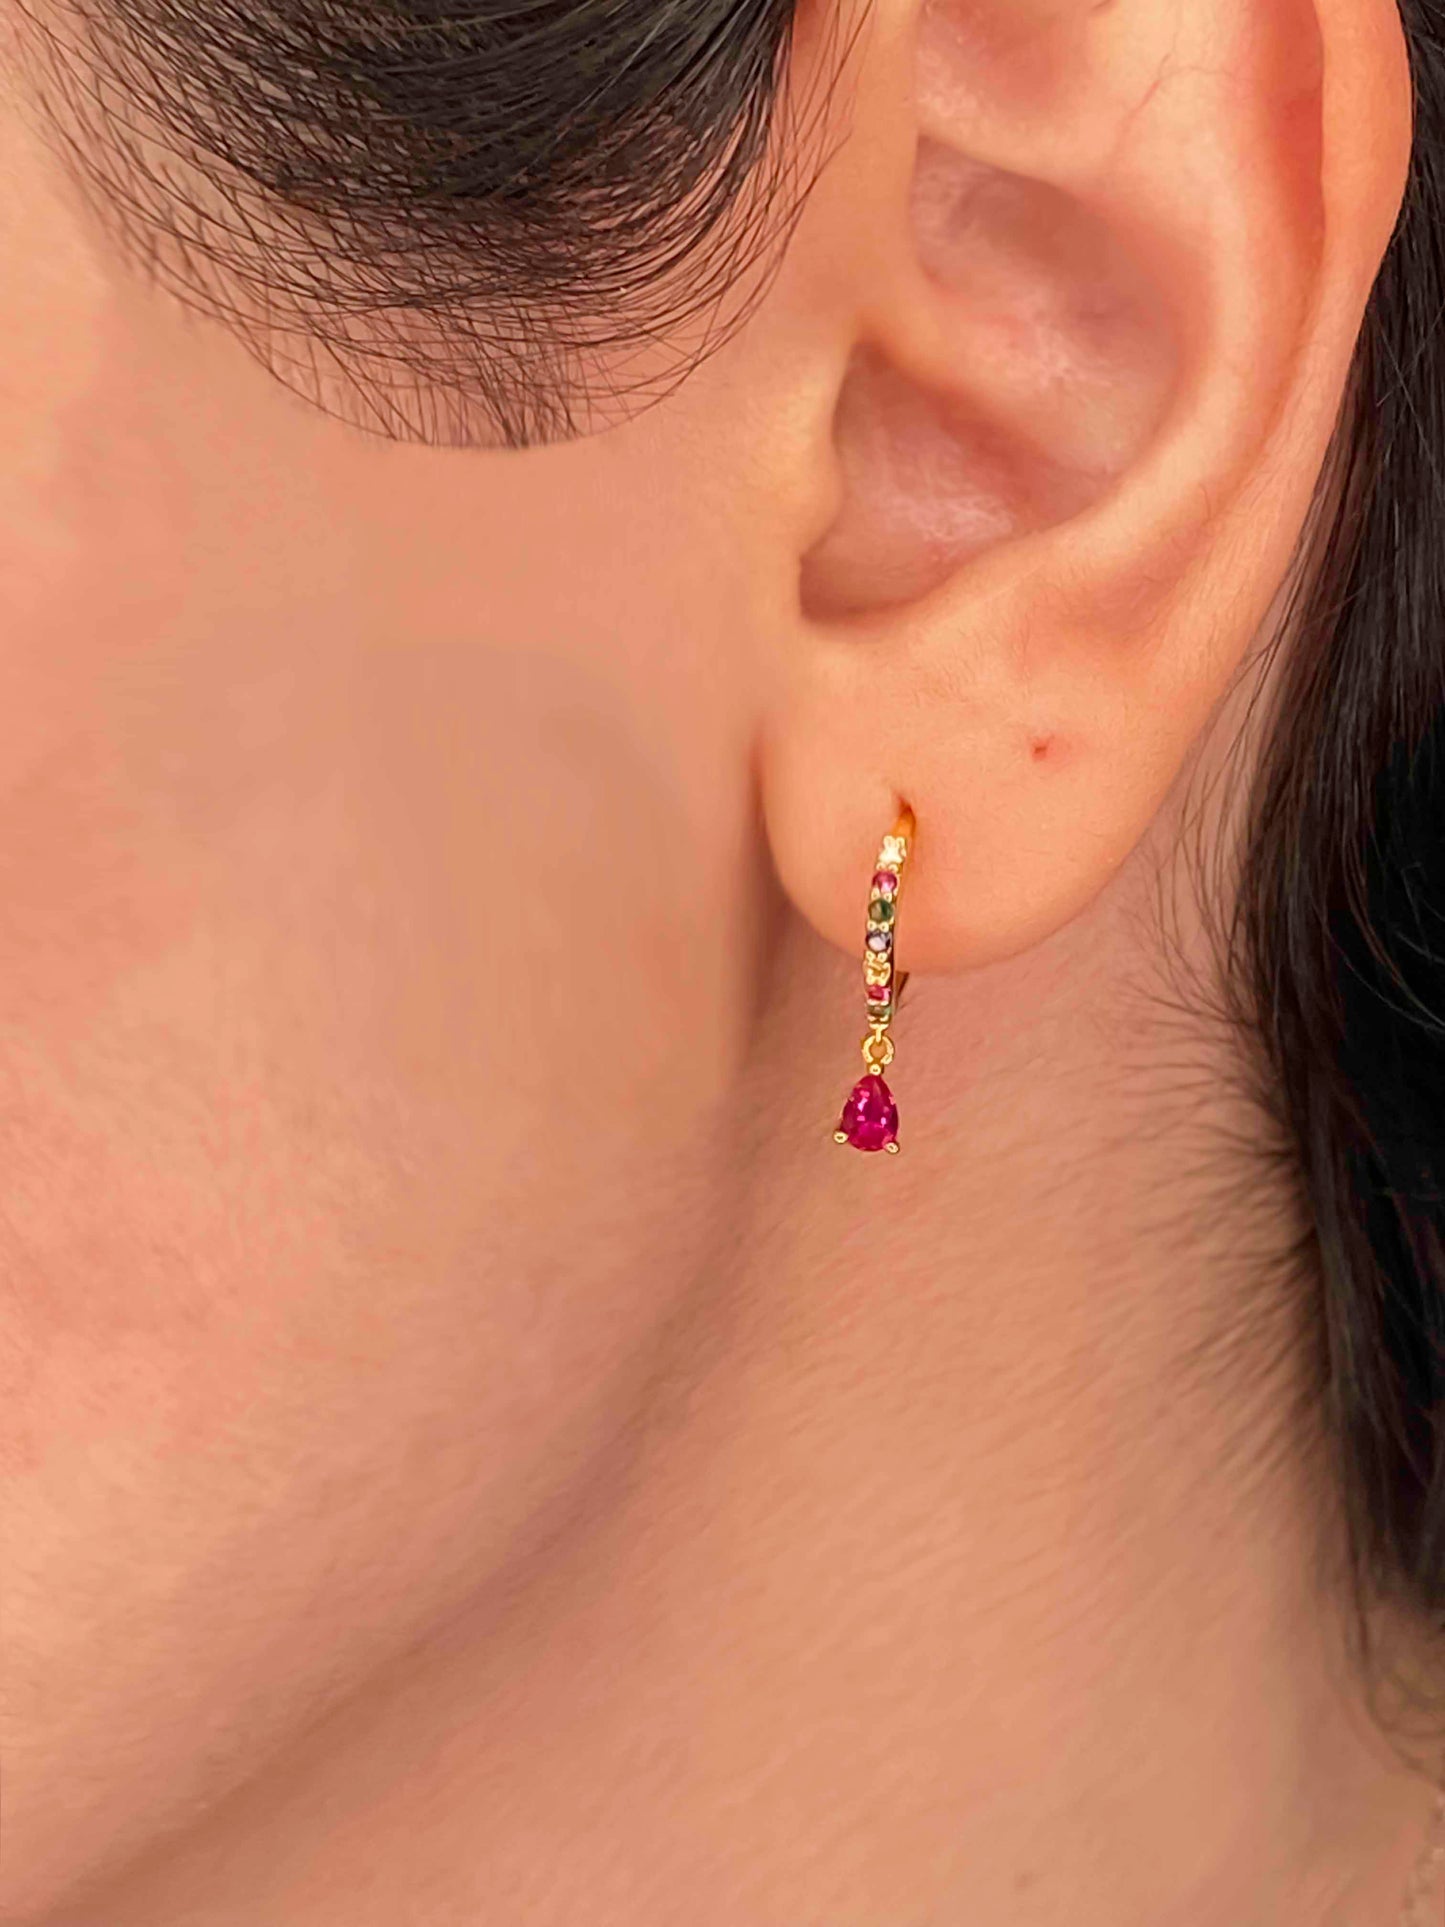 925 gold-plated sterling silver huggie hoop earrings with multicolored zirconia stones. 